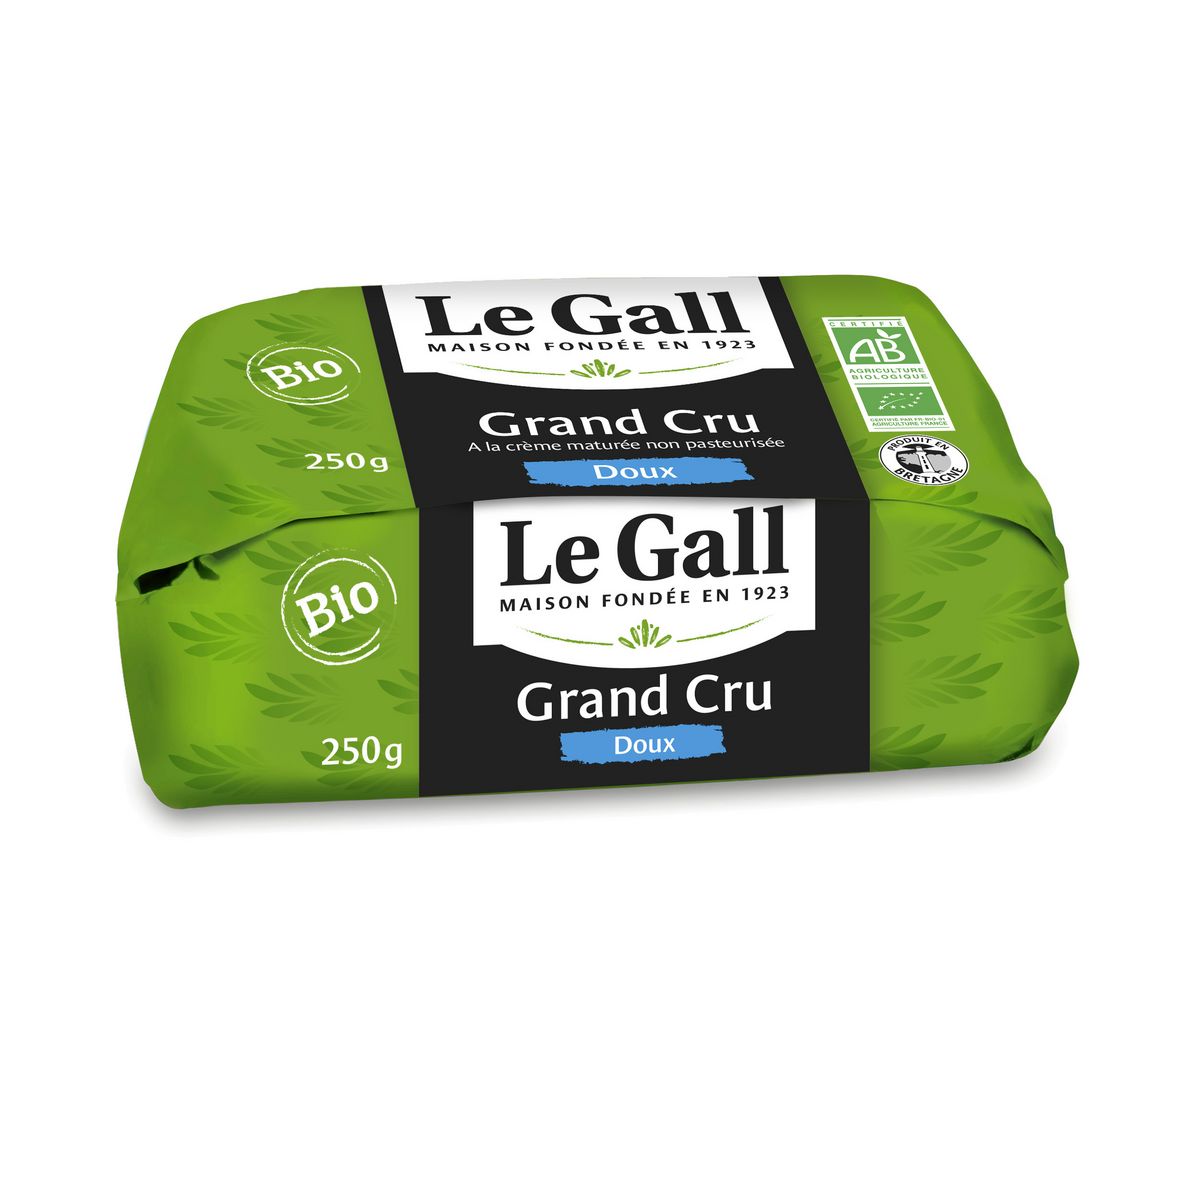 Le Gall grand cru organic unpasteurized soft churned unsalted butter 250g